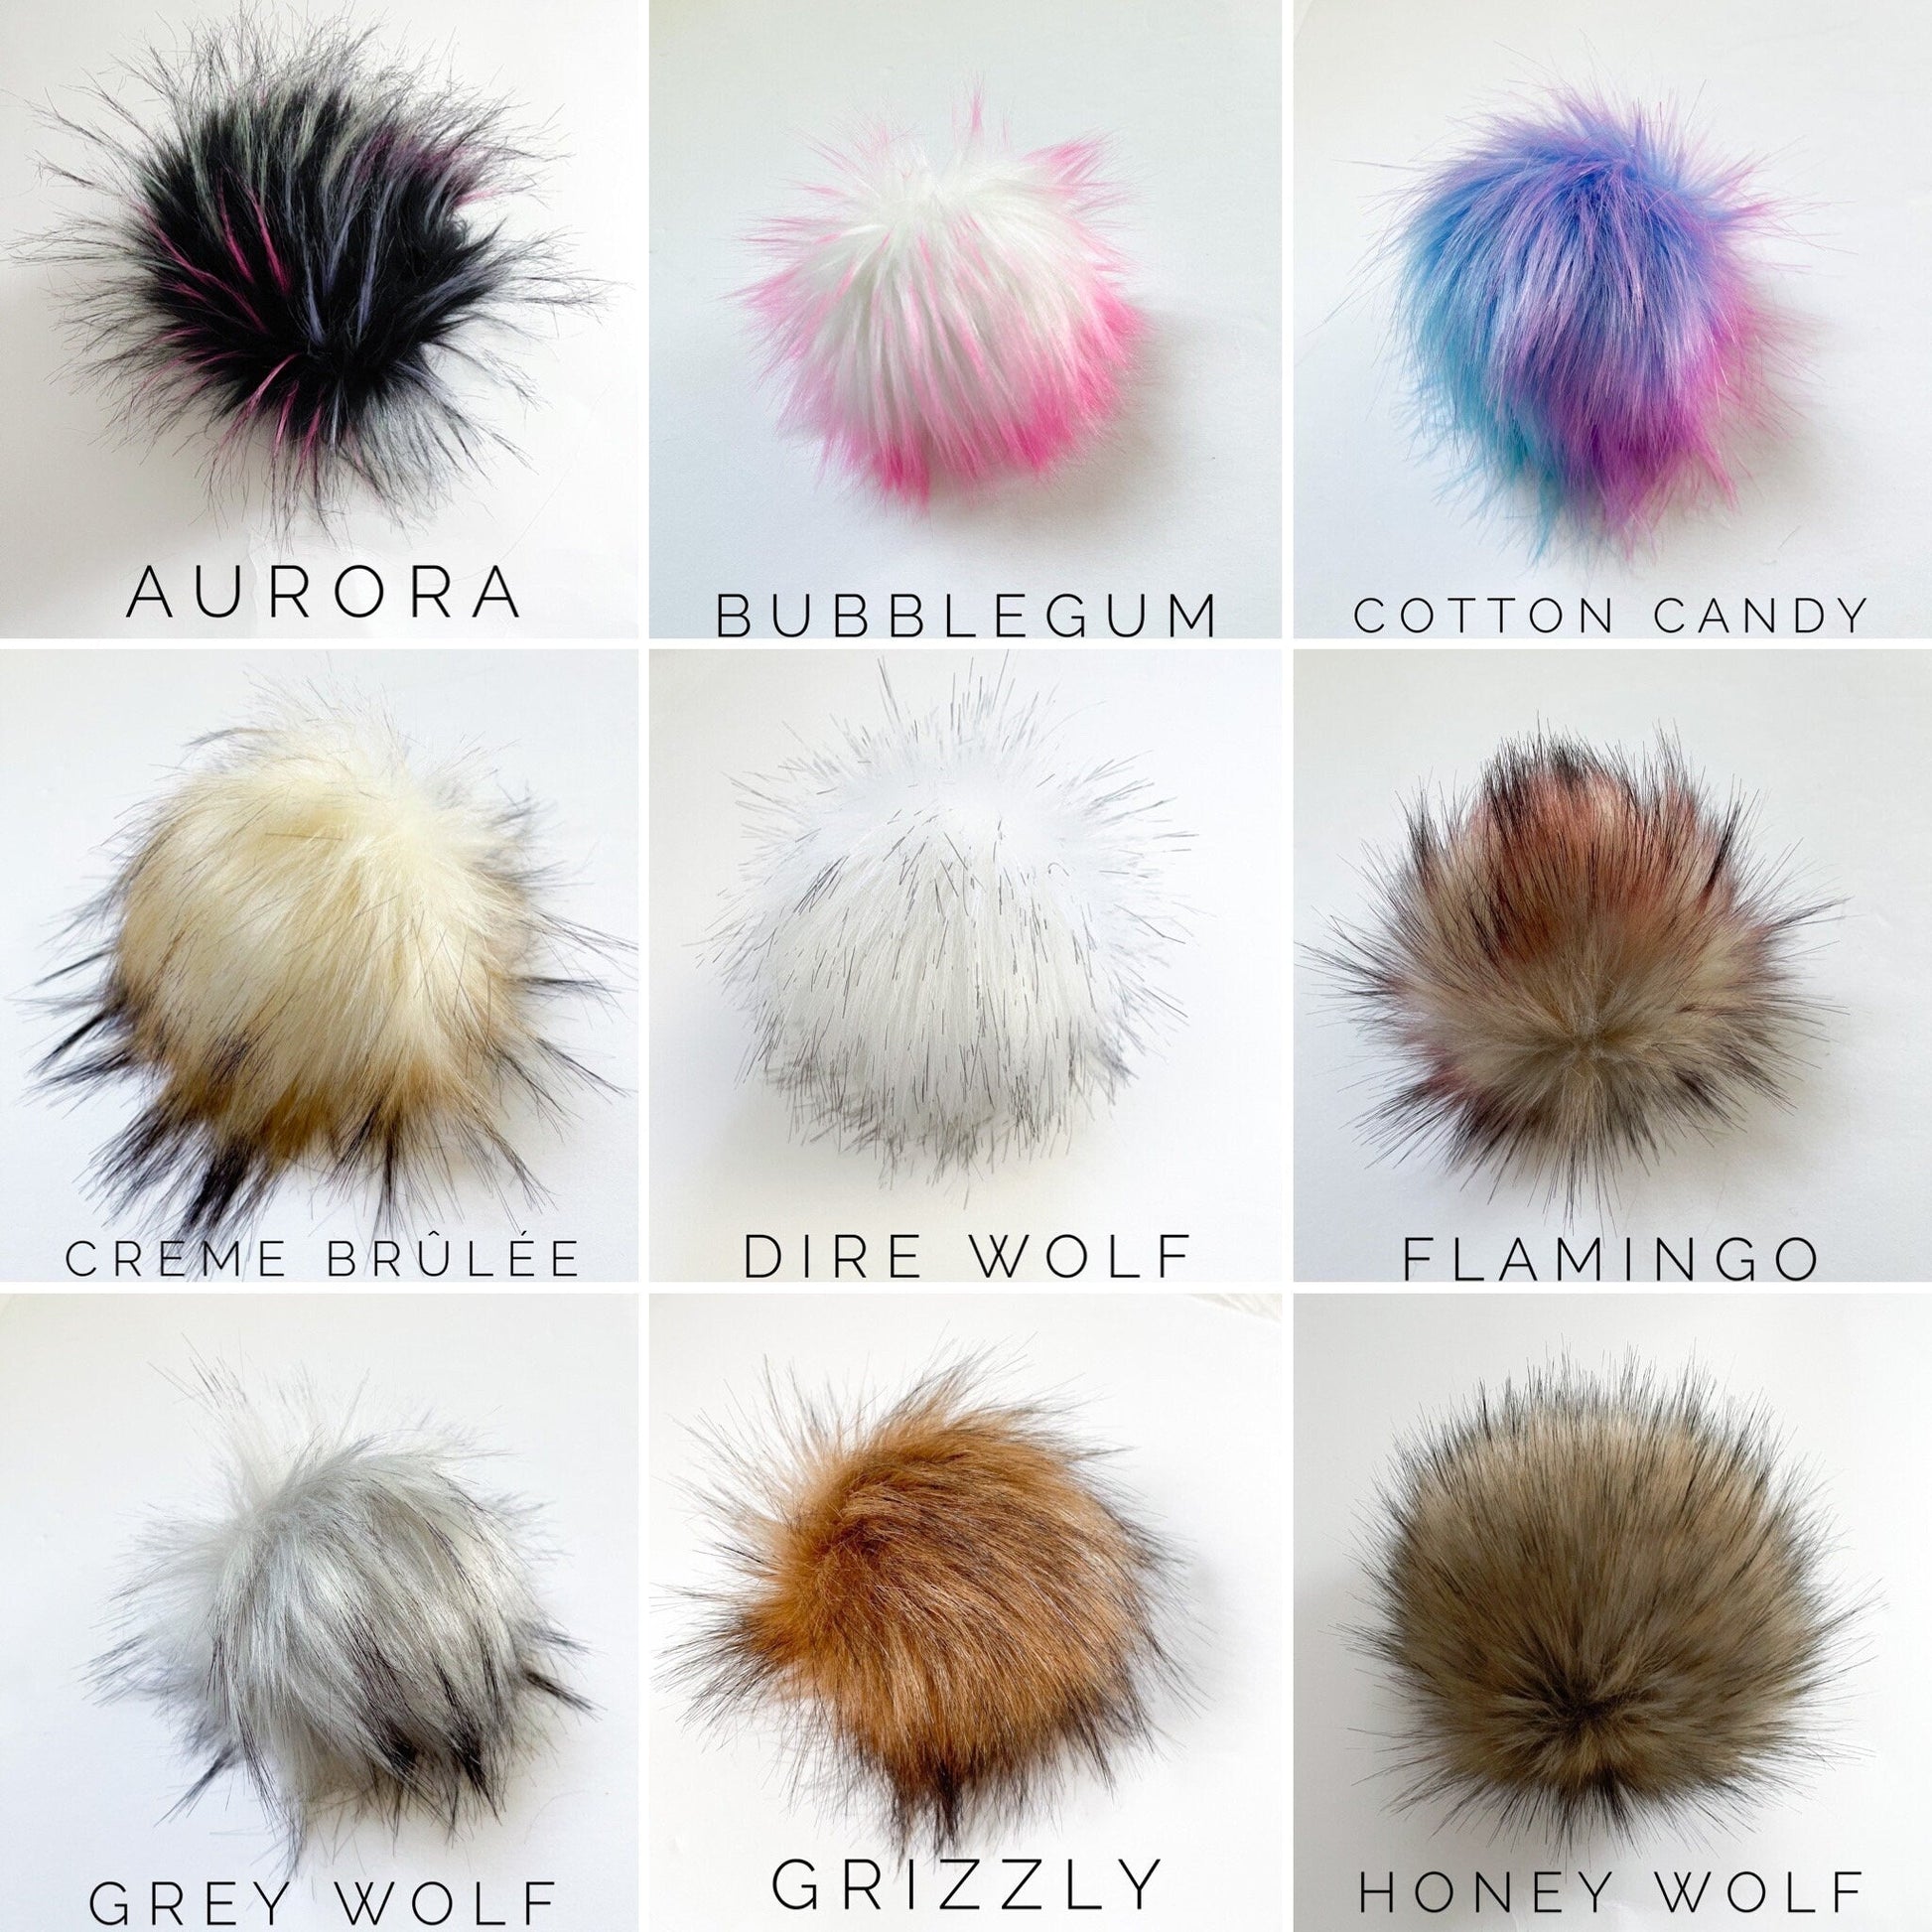 Winterfell Blue | Luxury Faux fur Pom Pom | Ties, Buttons or Snap Pompom - Buttons & Beans Co.- Buttons & Beans Co.